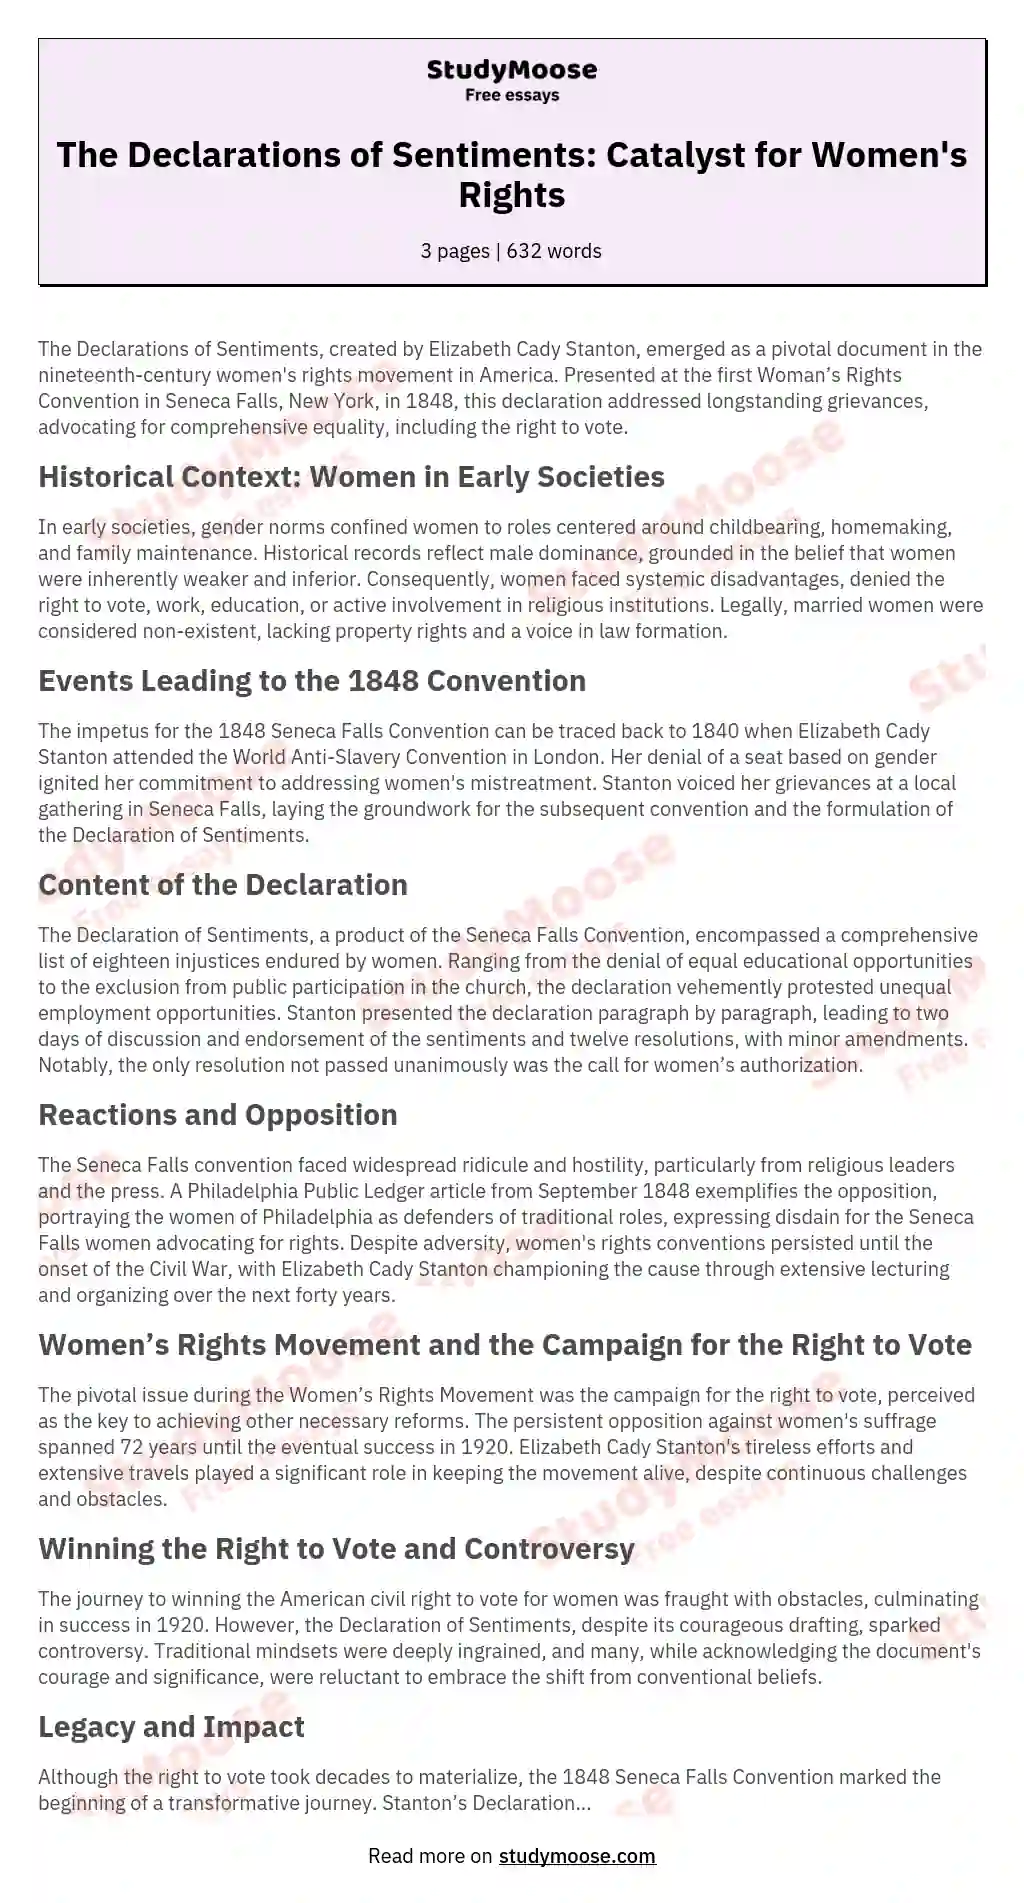 Respect of Women and Declaration of Sentiments